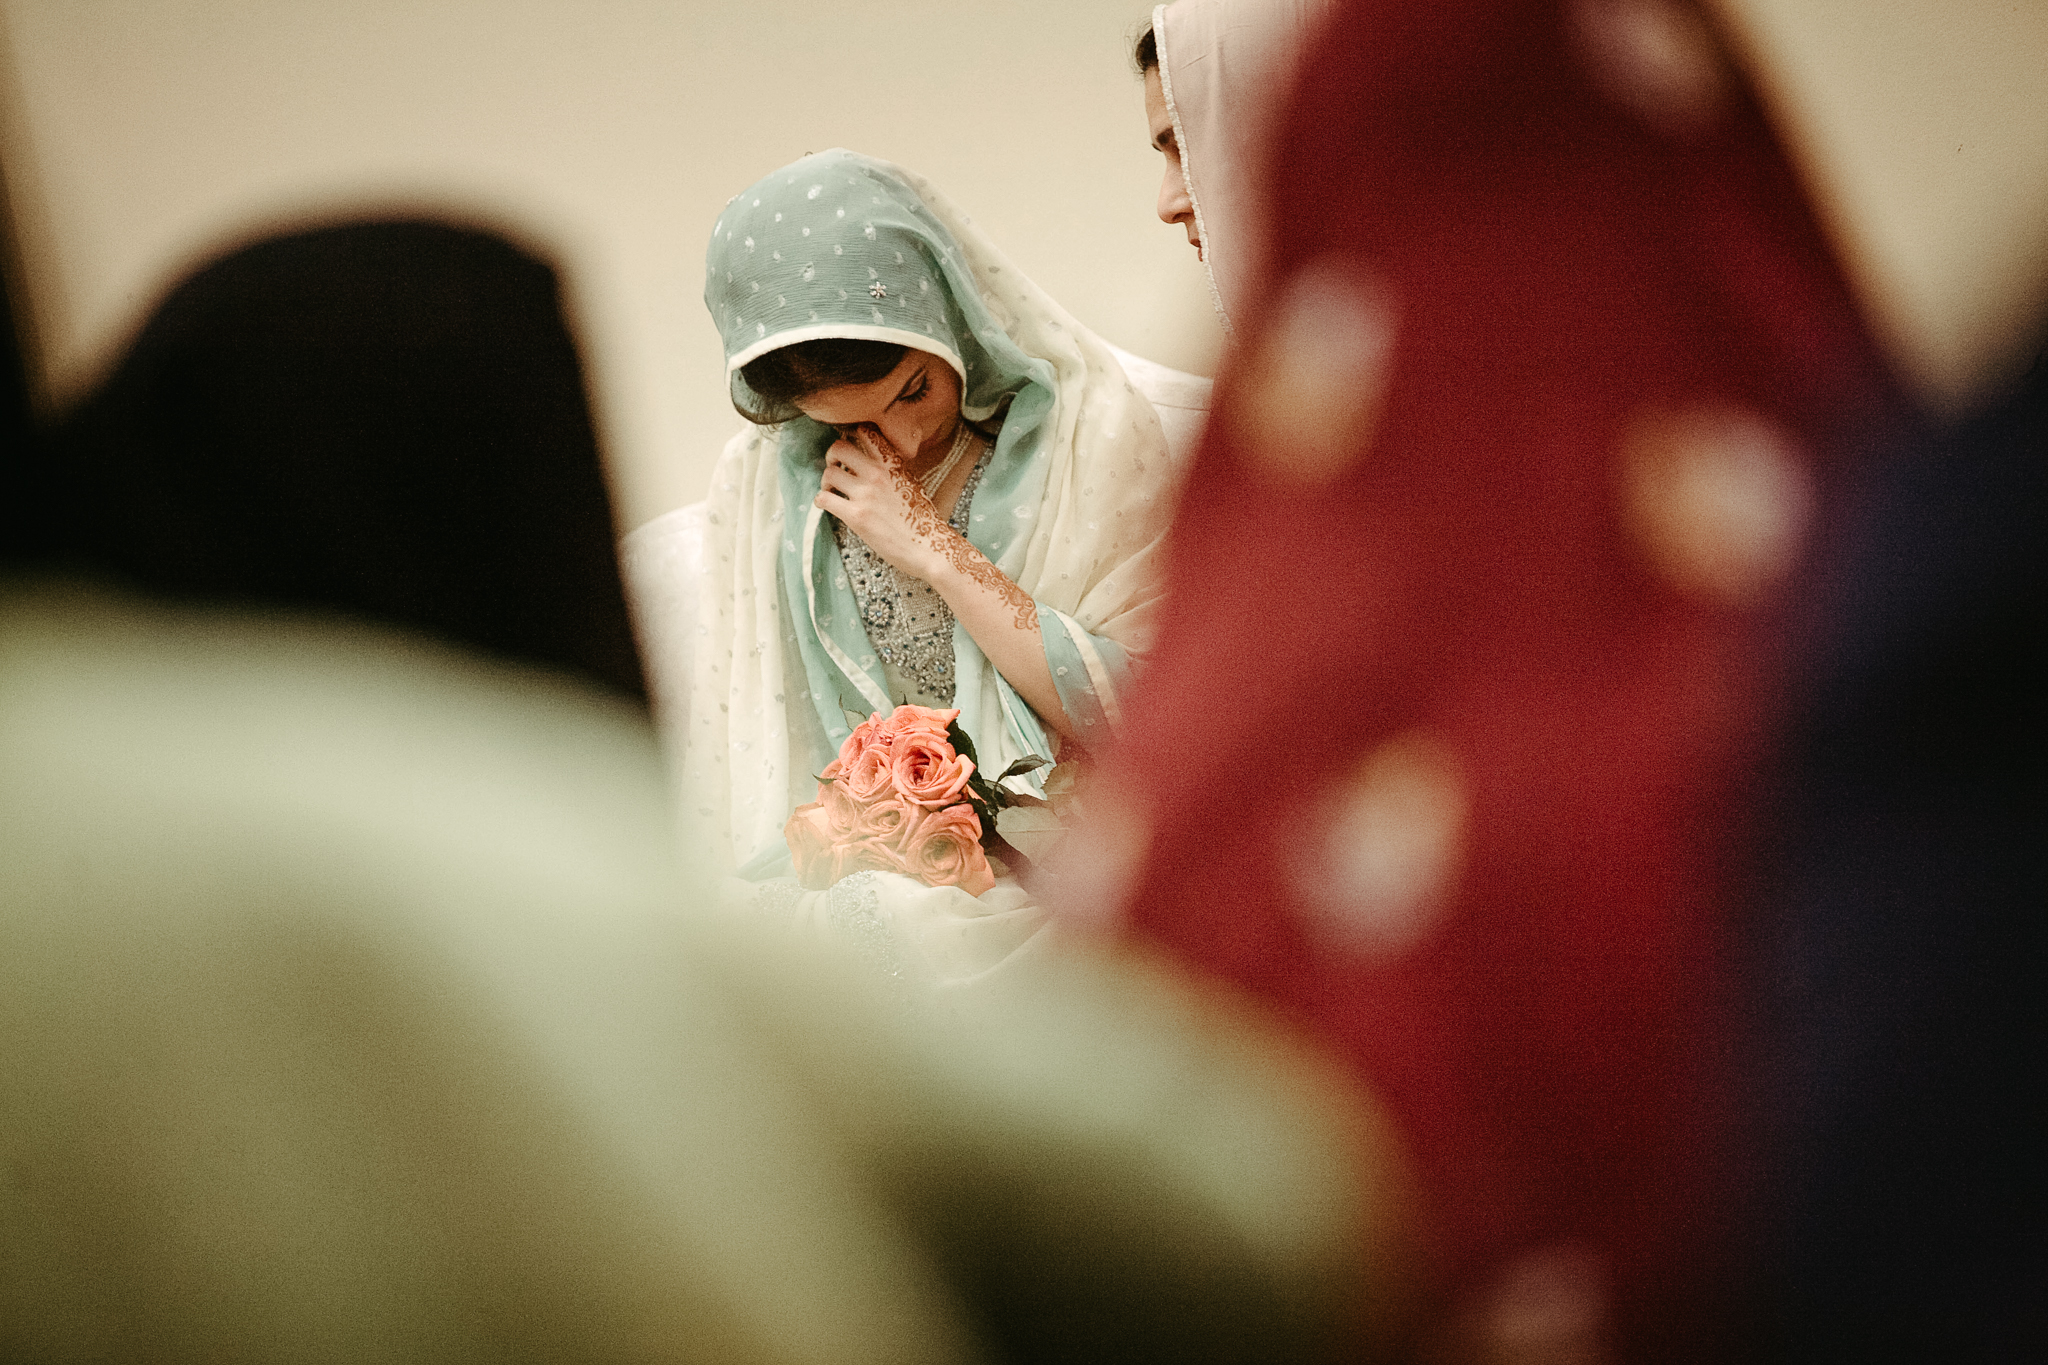 Bride cries at Nikah wedding traditional ceremony documentary photo